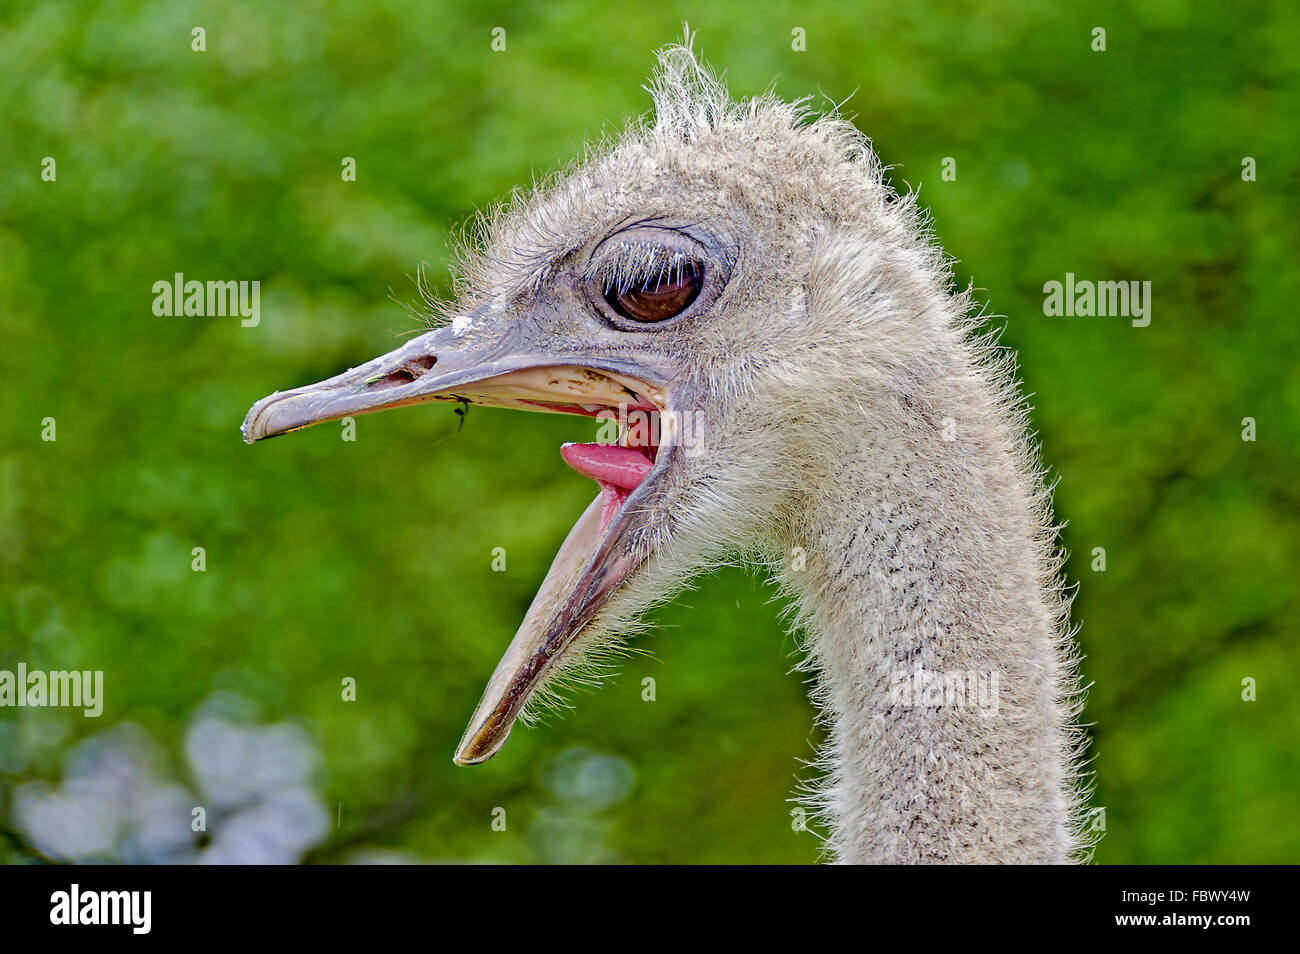 Head of an crying ostrich Stock Photo